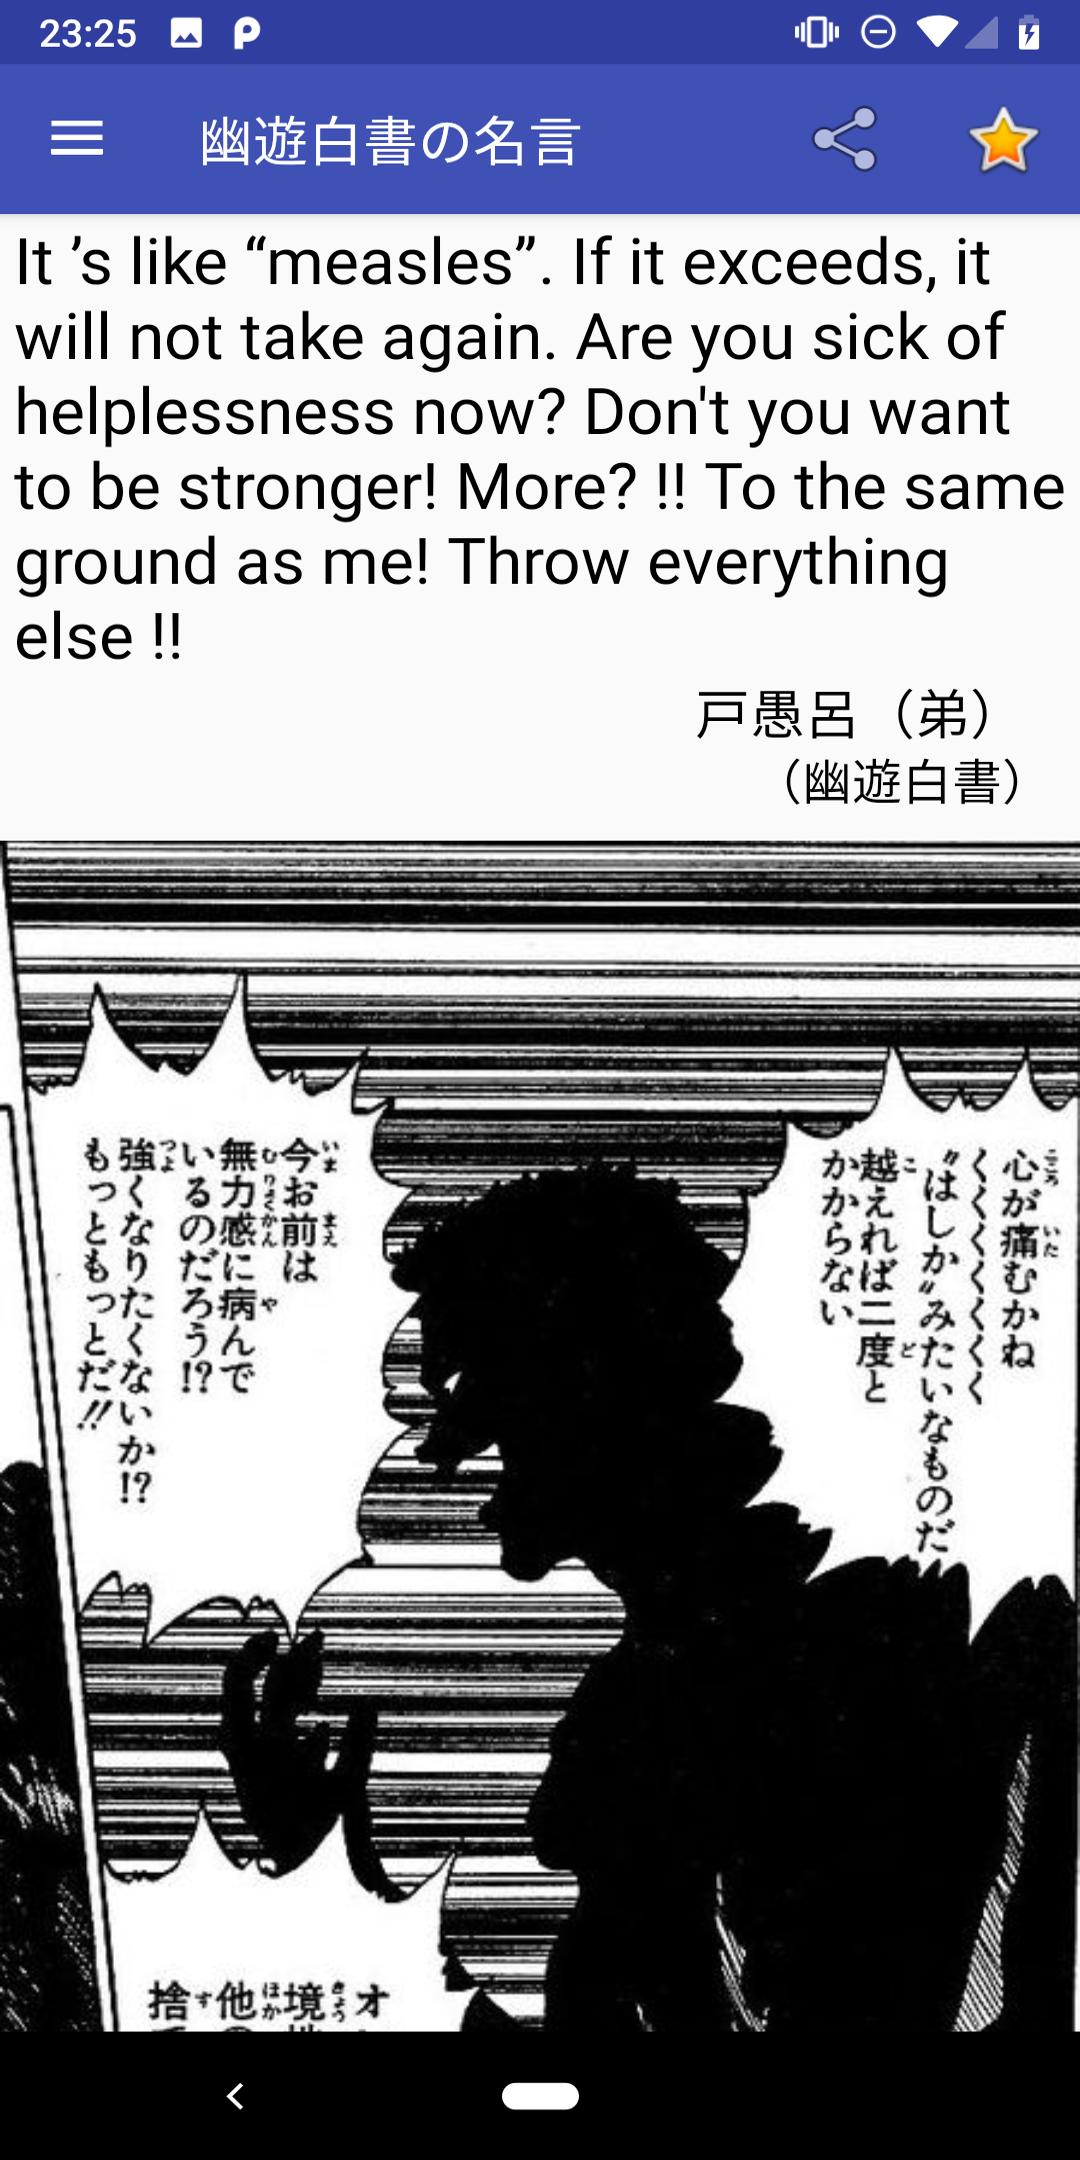 Manga Quotes For Android Apk Download